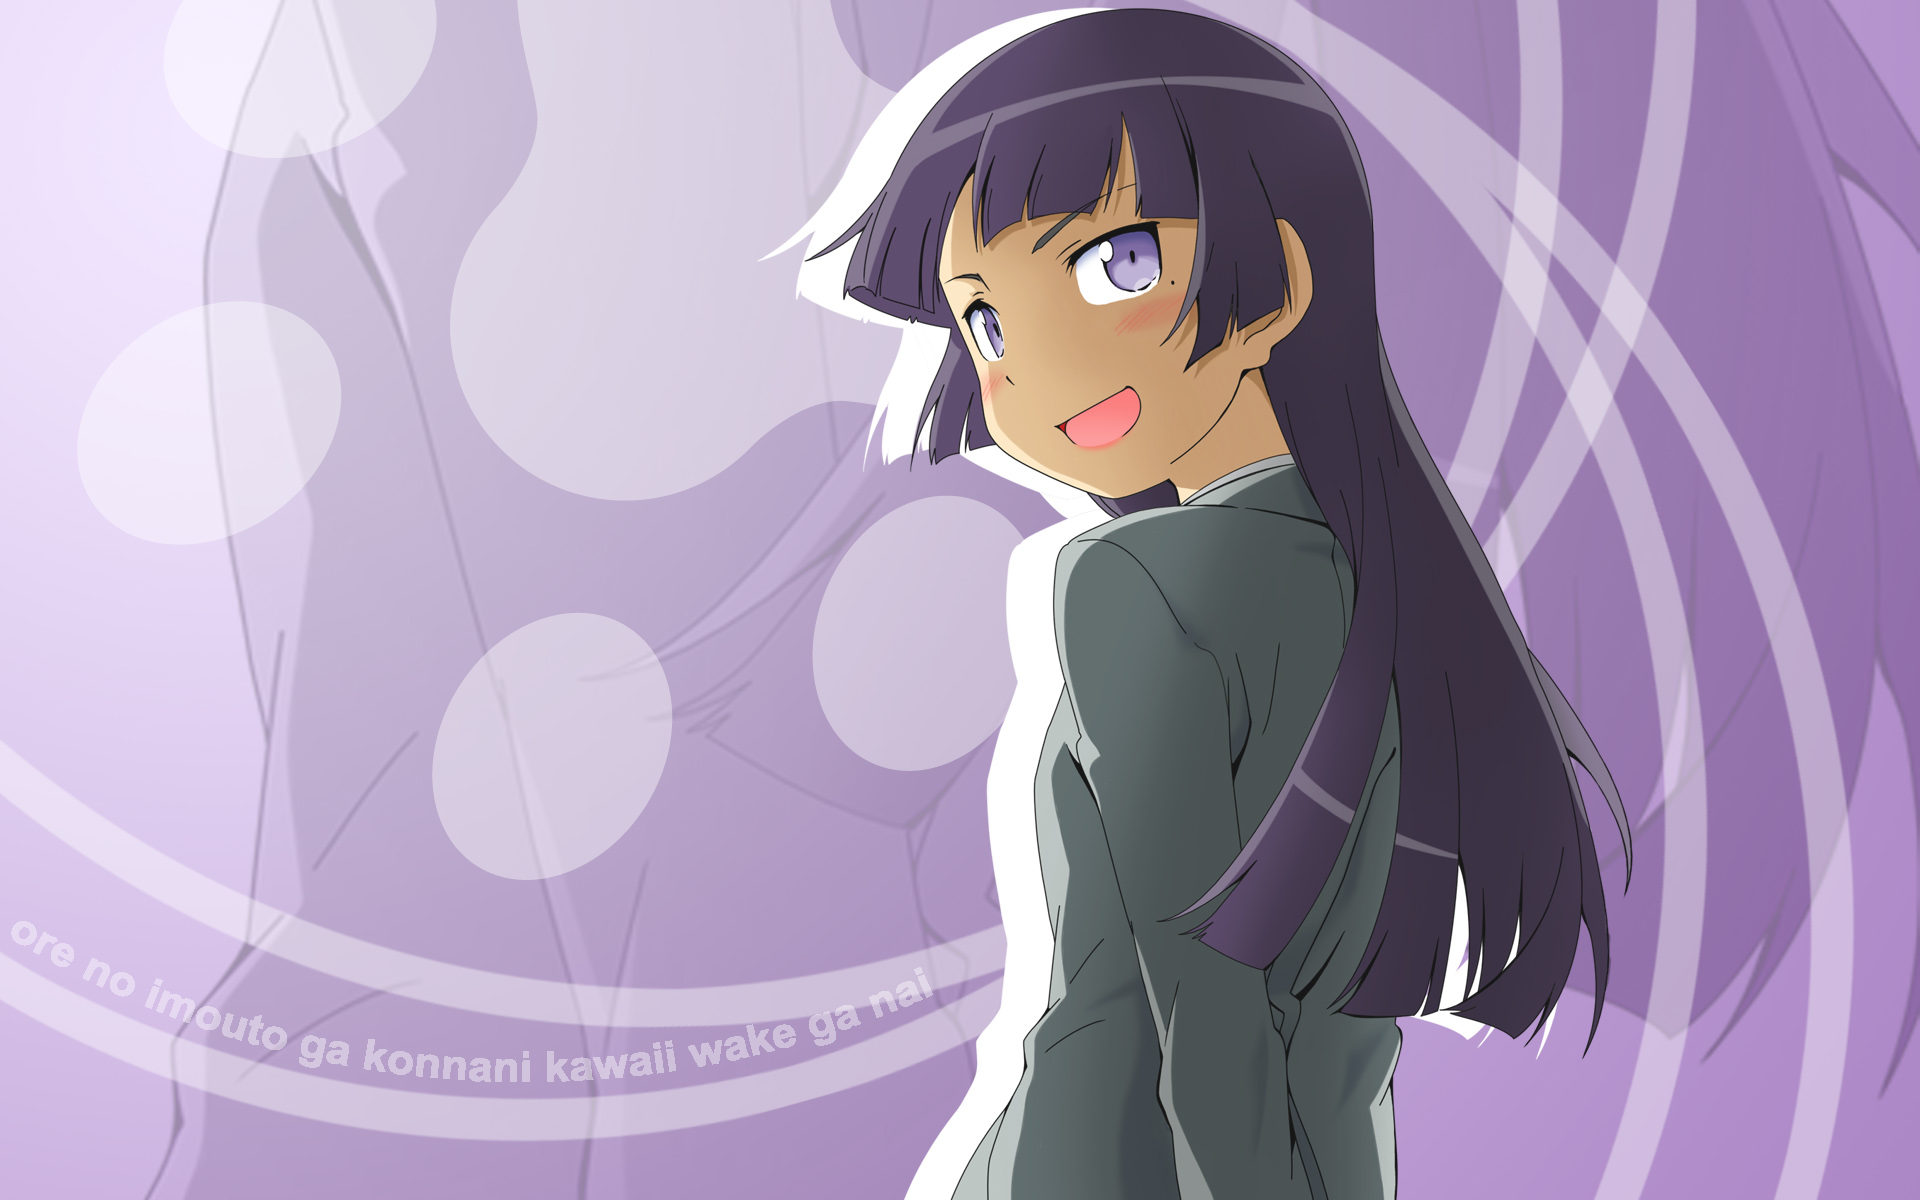 Ruri Gokō, an anime character from Oreimo, posing for a desktop wallpaper.